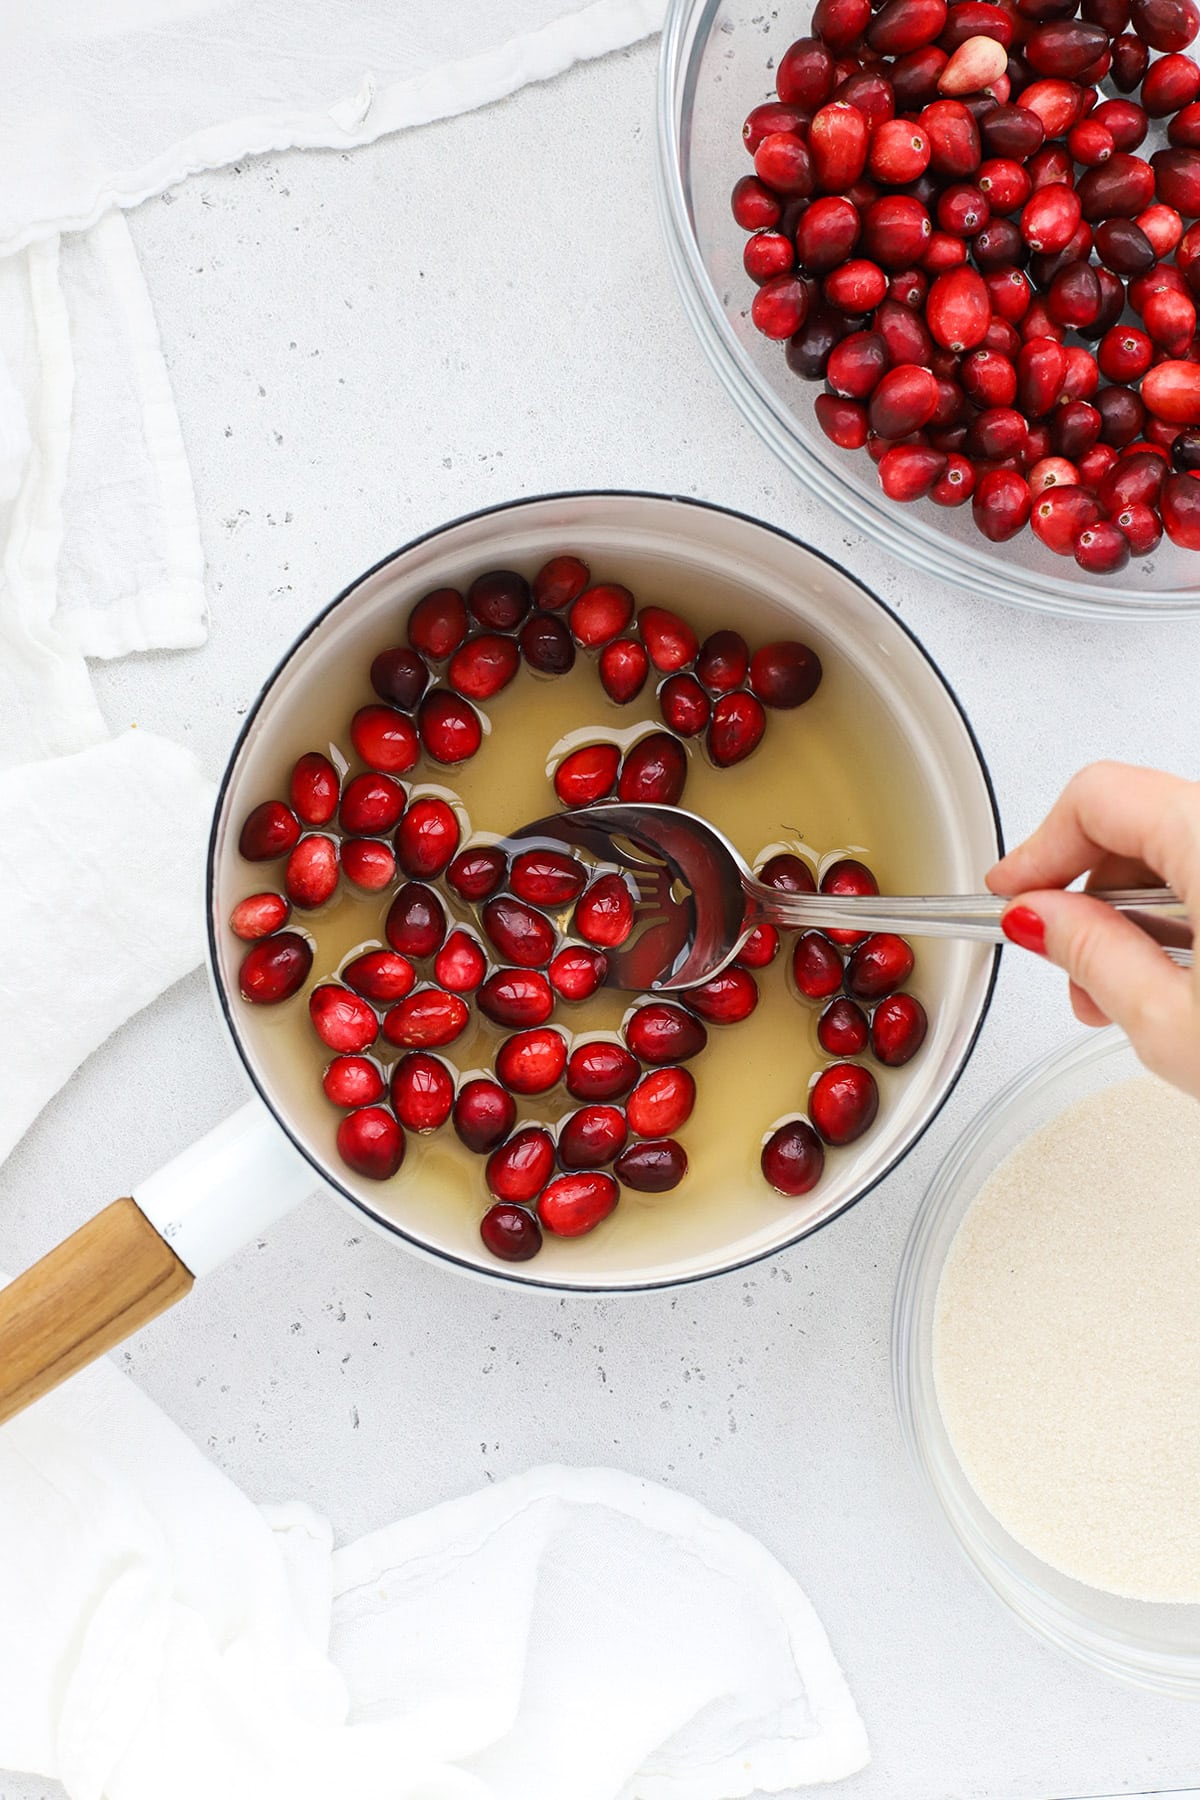 Dipping fresh cranberries in simple syrup to make sugared cranberries